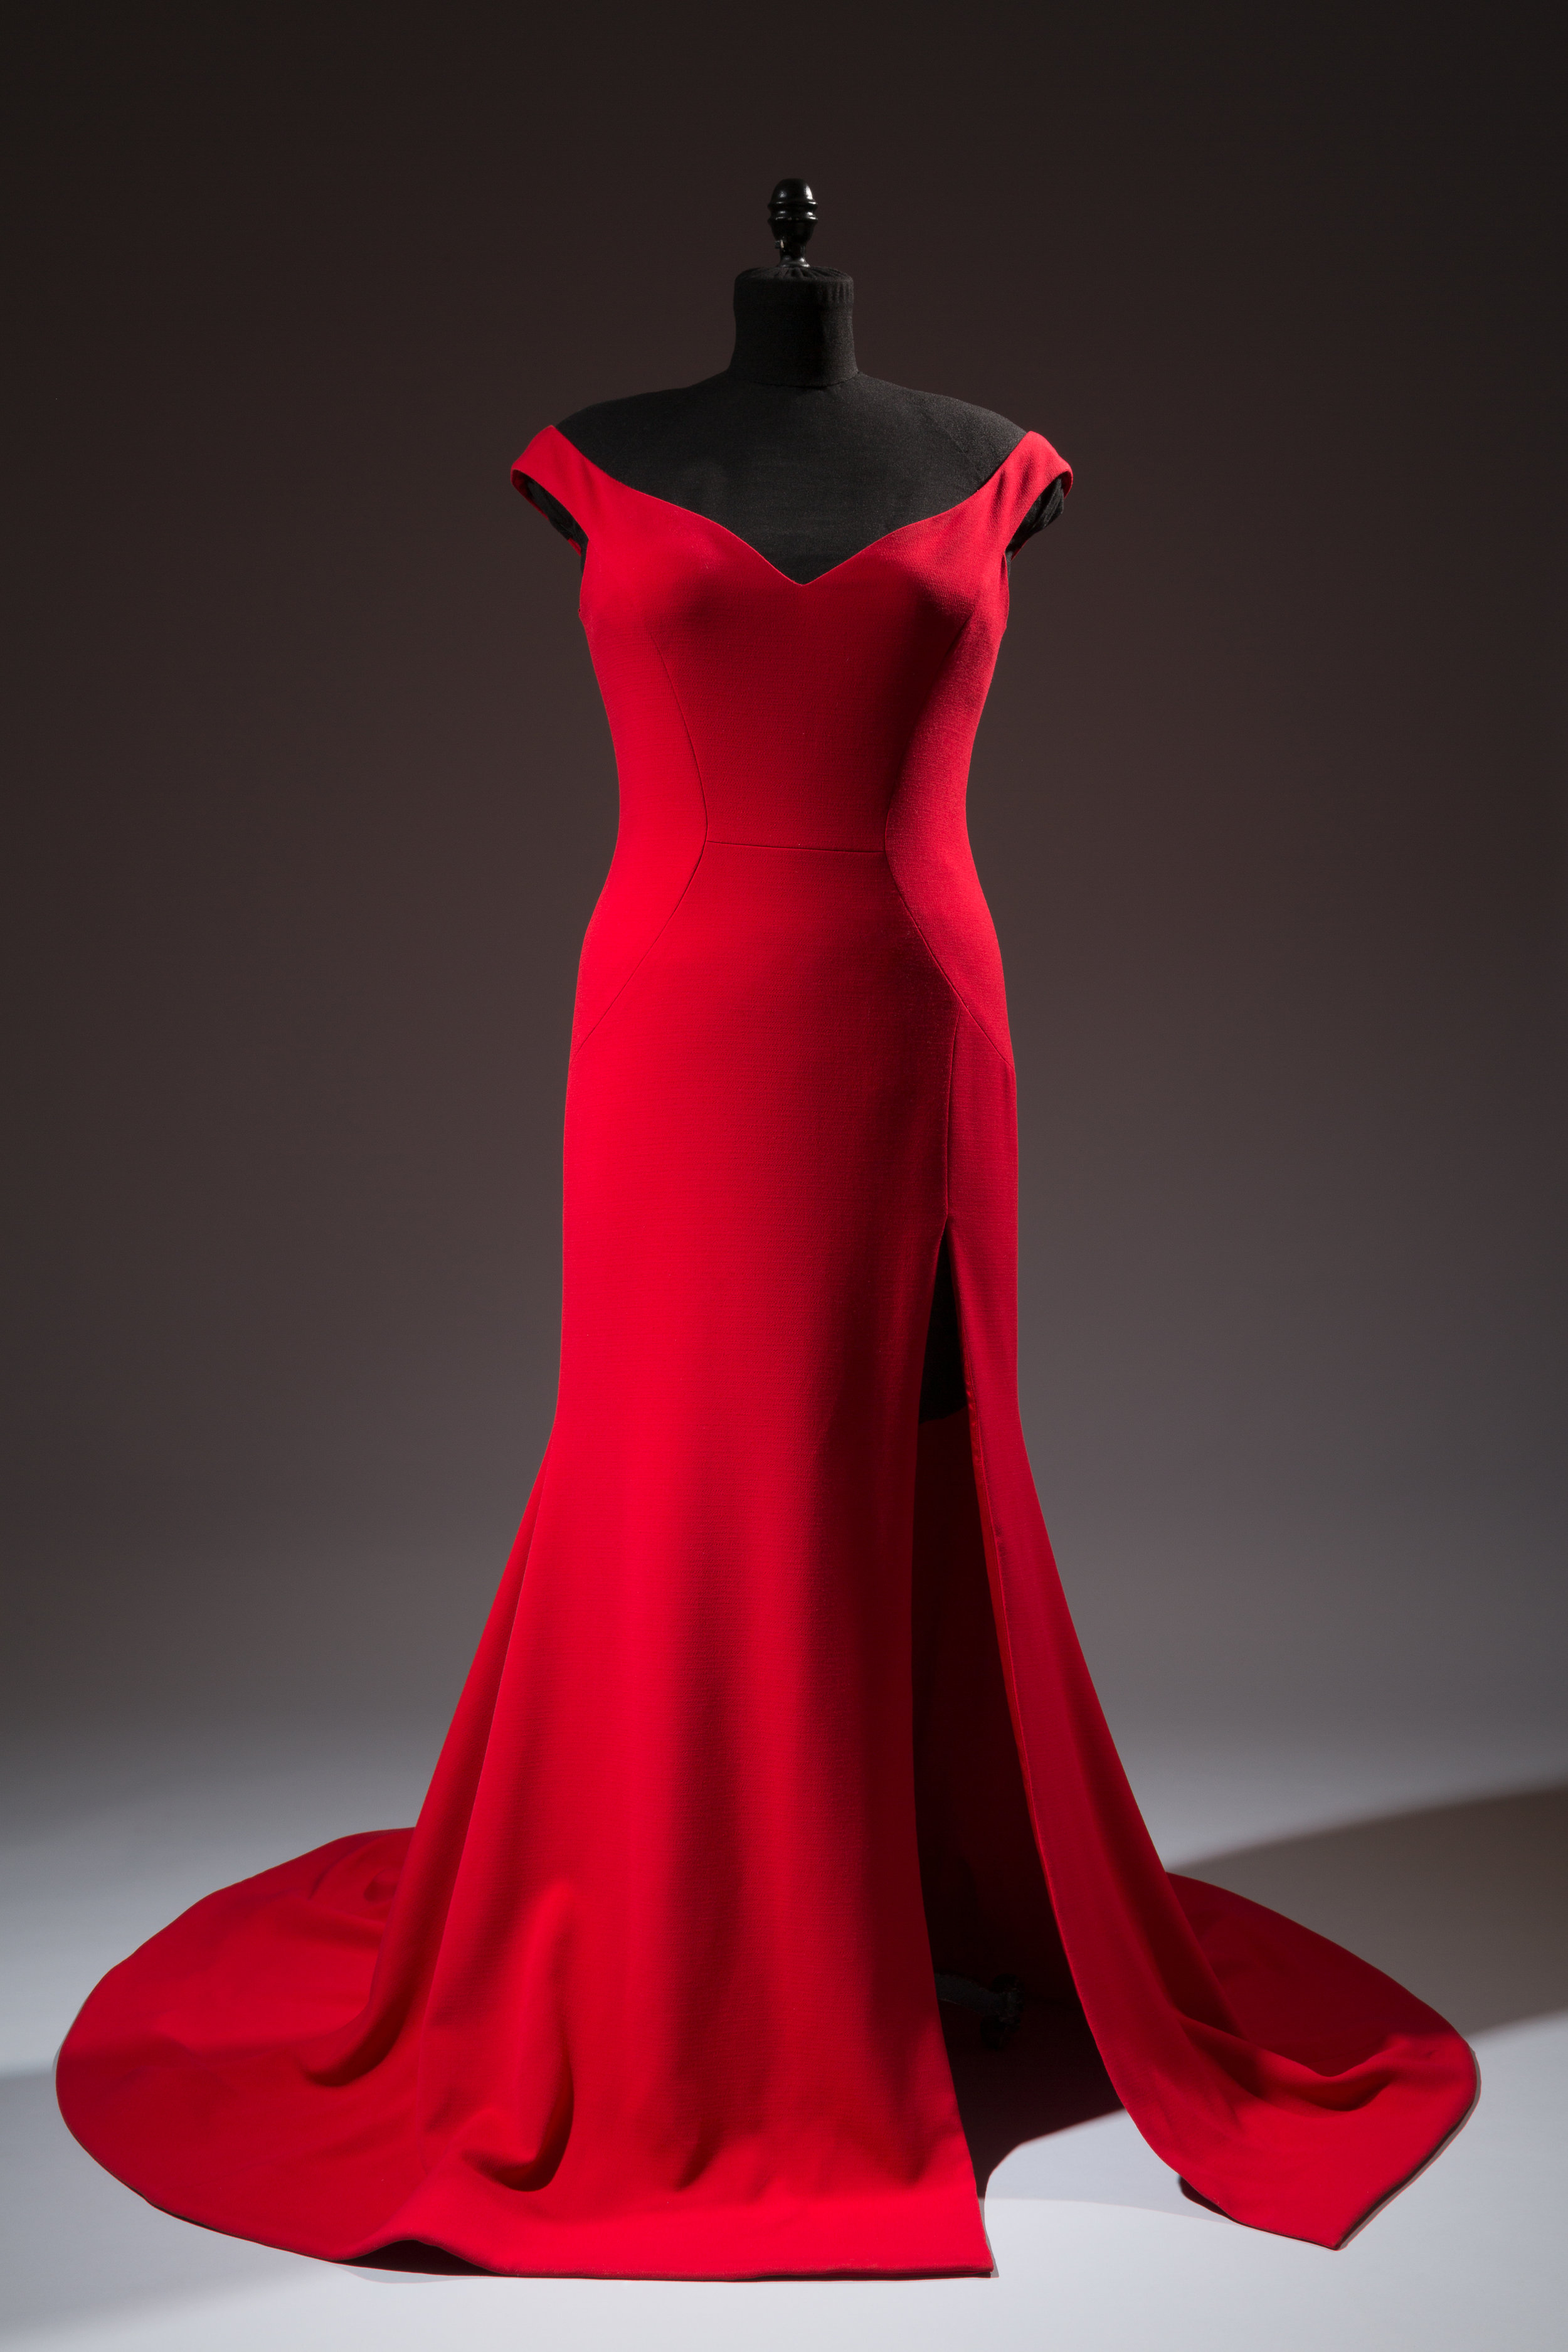  Christian Siriano, custom dress for actress Leslie Jones, faille crepe, 2016, USA, Gift of Christian Siriano. Photograph courtesy The Museum at FIT. 